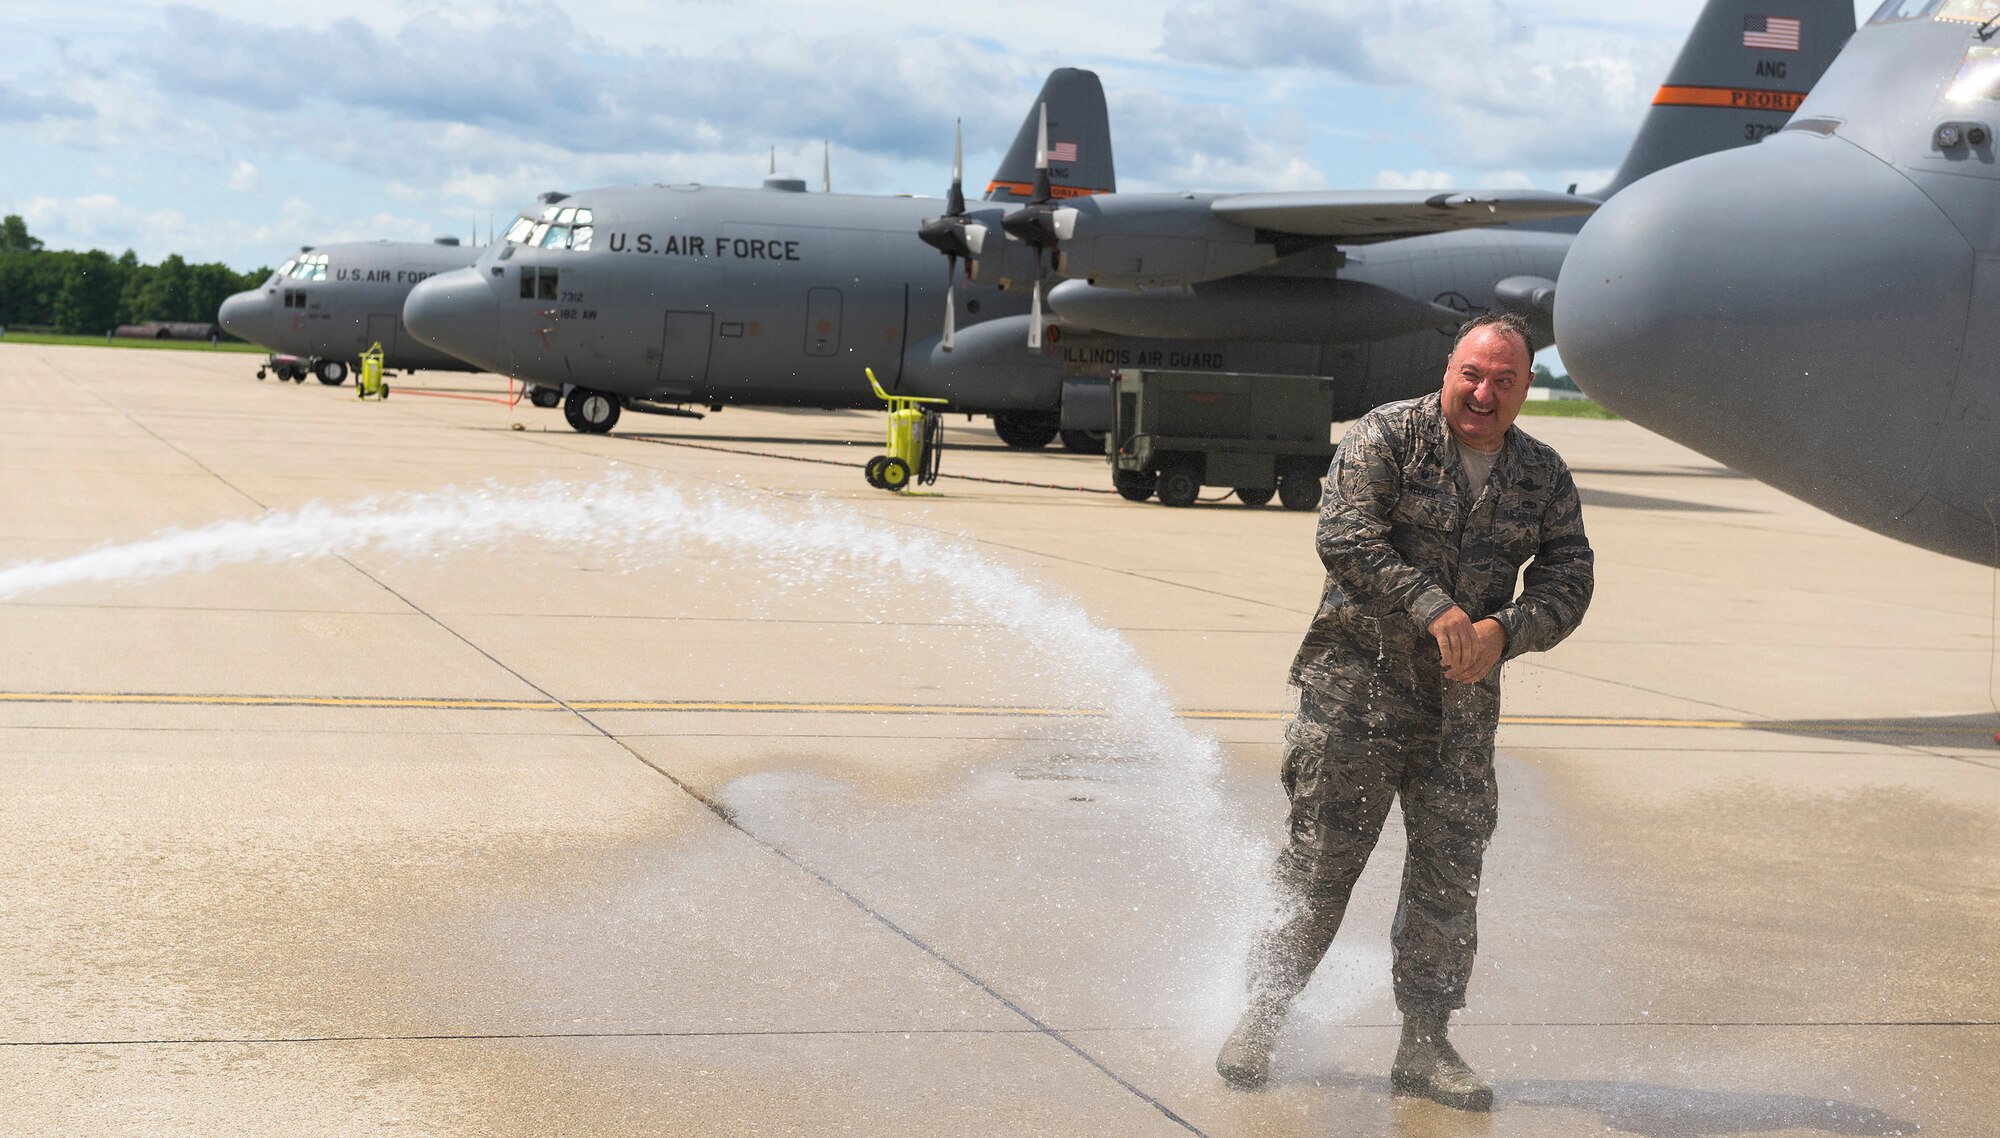 U.S. Air Force Col. Barton Welker, the commander of the 182nd Maintenance Group, Illinois Air National Guard, is doused with water after his “fini flight” at the 182nd Airlift Wing in Peoria, Ill., July 25, 2016. Welker is scheduled to retire Aug. 1 after 34 years of military service. (U.S. Air National Guard photo by Staff Sgt. Lealan Buehrer)